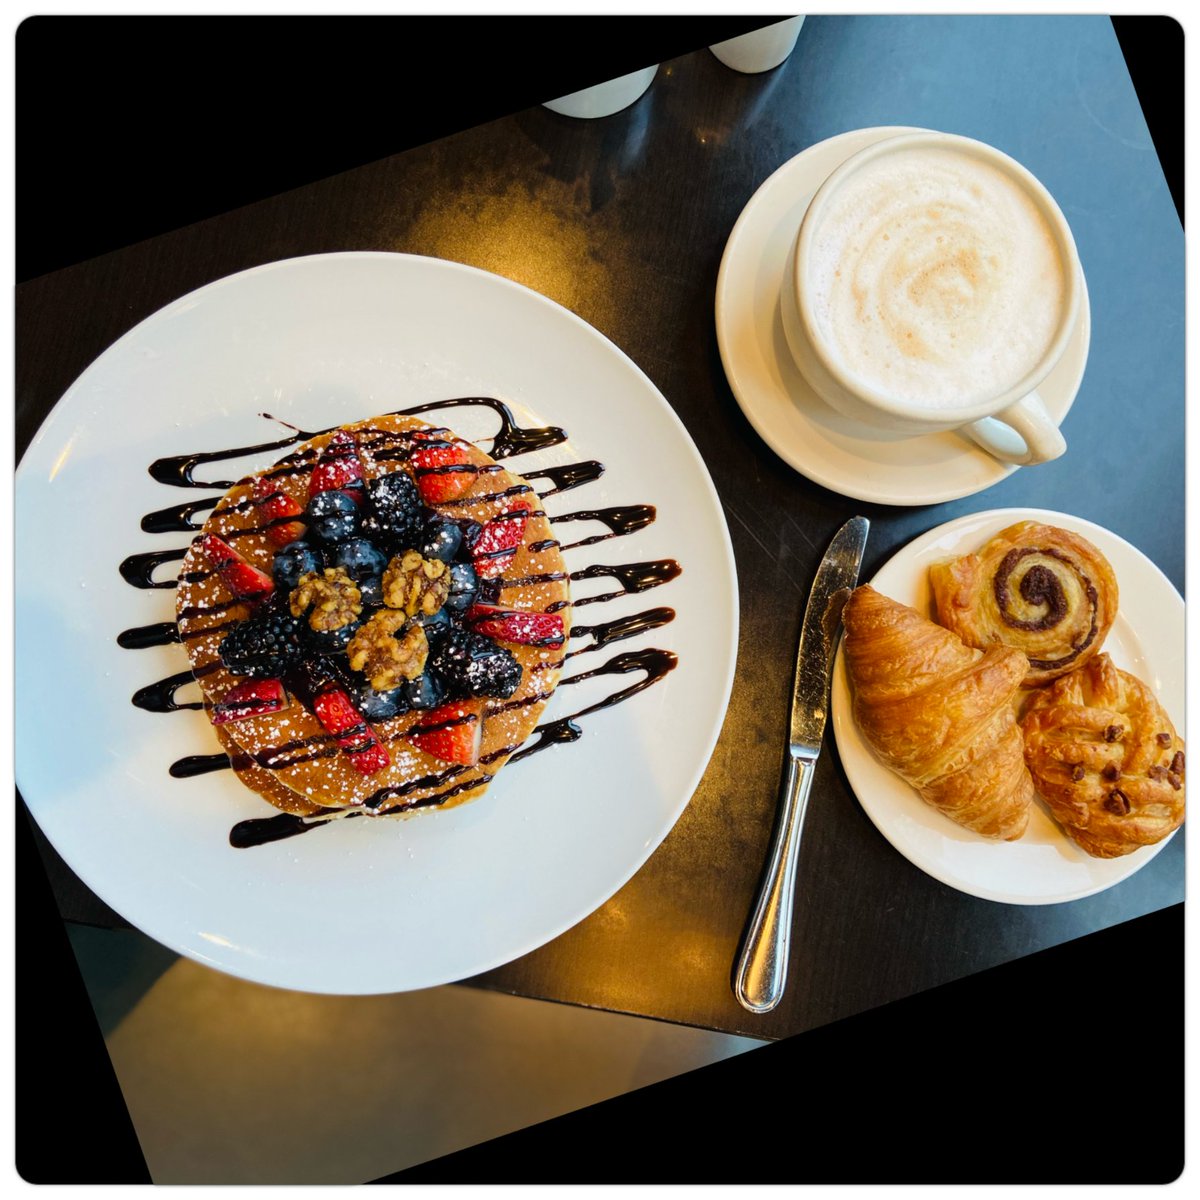 We are living for this fabulous view and hot breakfast on these cold Vancouver days. Come Join us for breakfast at Mosaic Grille from 7:00 AM to 11:00 Am every day, and enjoy some of our chefs delicacies like these Traditional Pancakes, fresh pastries and a hot cup of Latte.